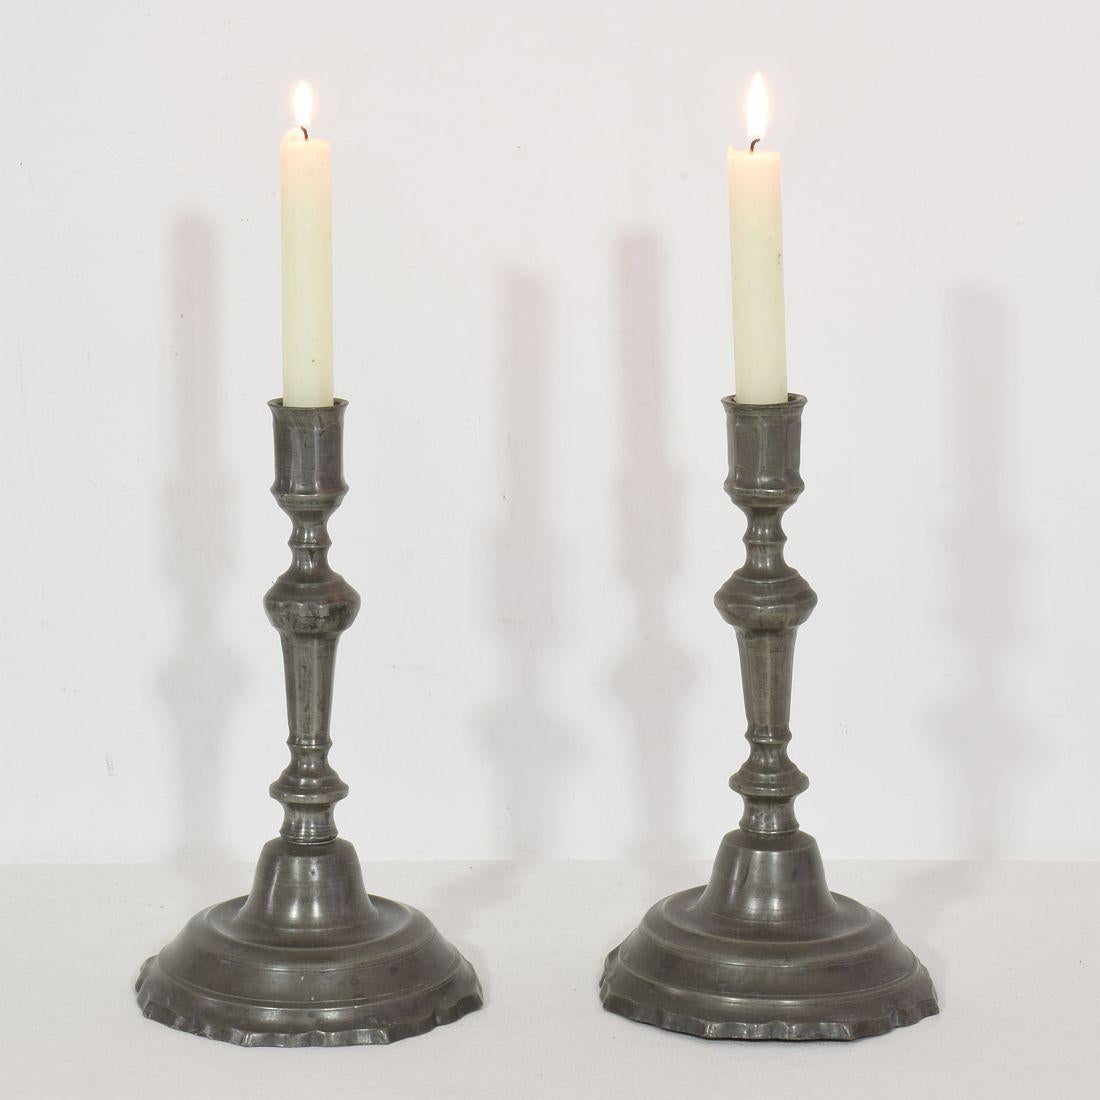 Lovely pair of pewter candle holders with a beautiful patine.
France circa 1780.
Weathered condition with minor losses.